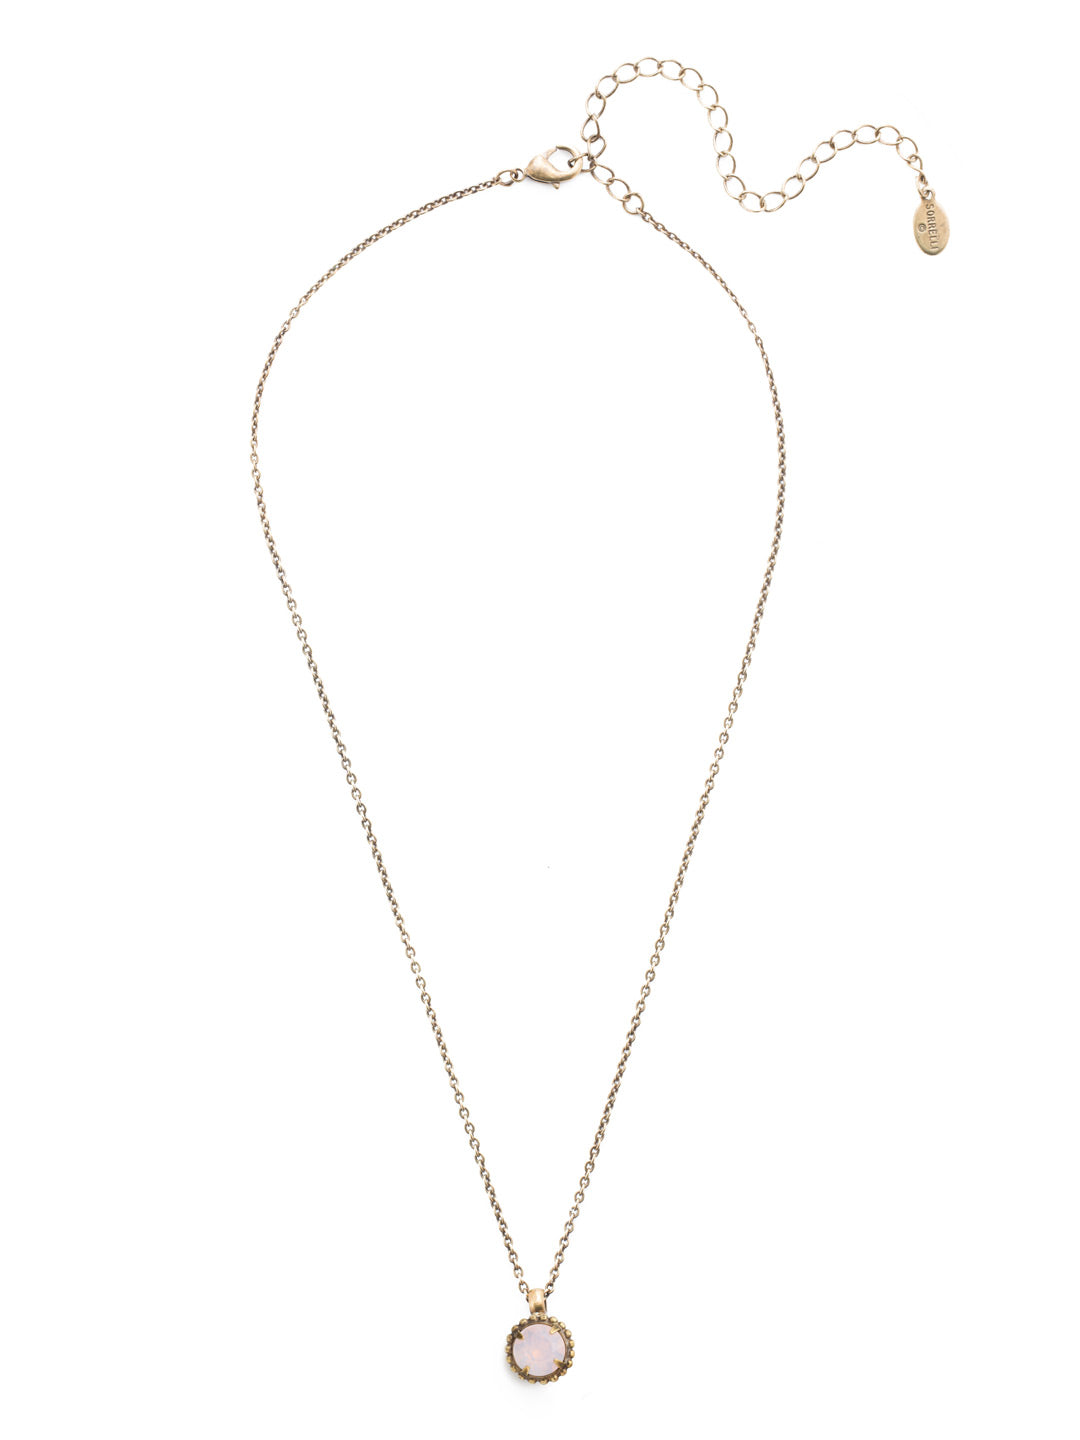 Simplicity Pendant Necklace - NBY38AGROW